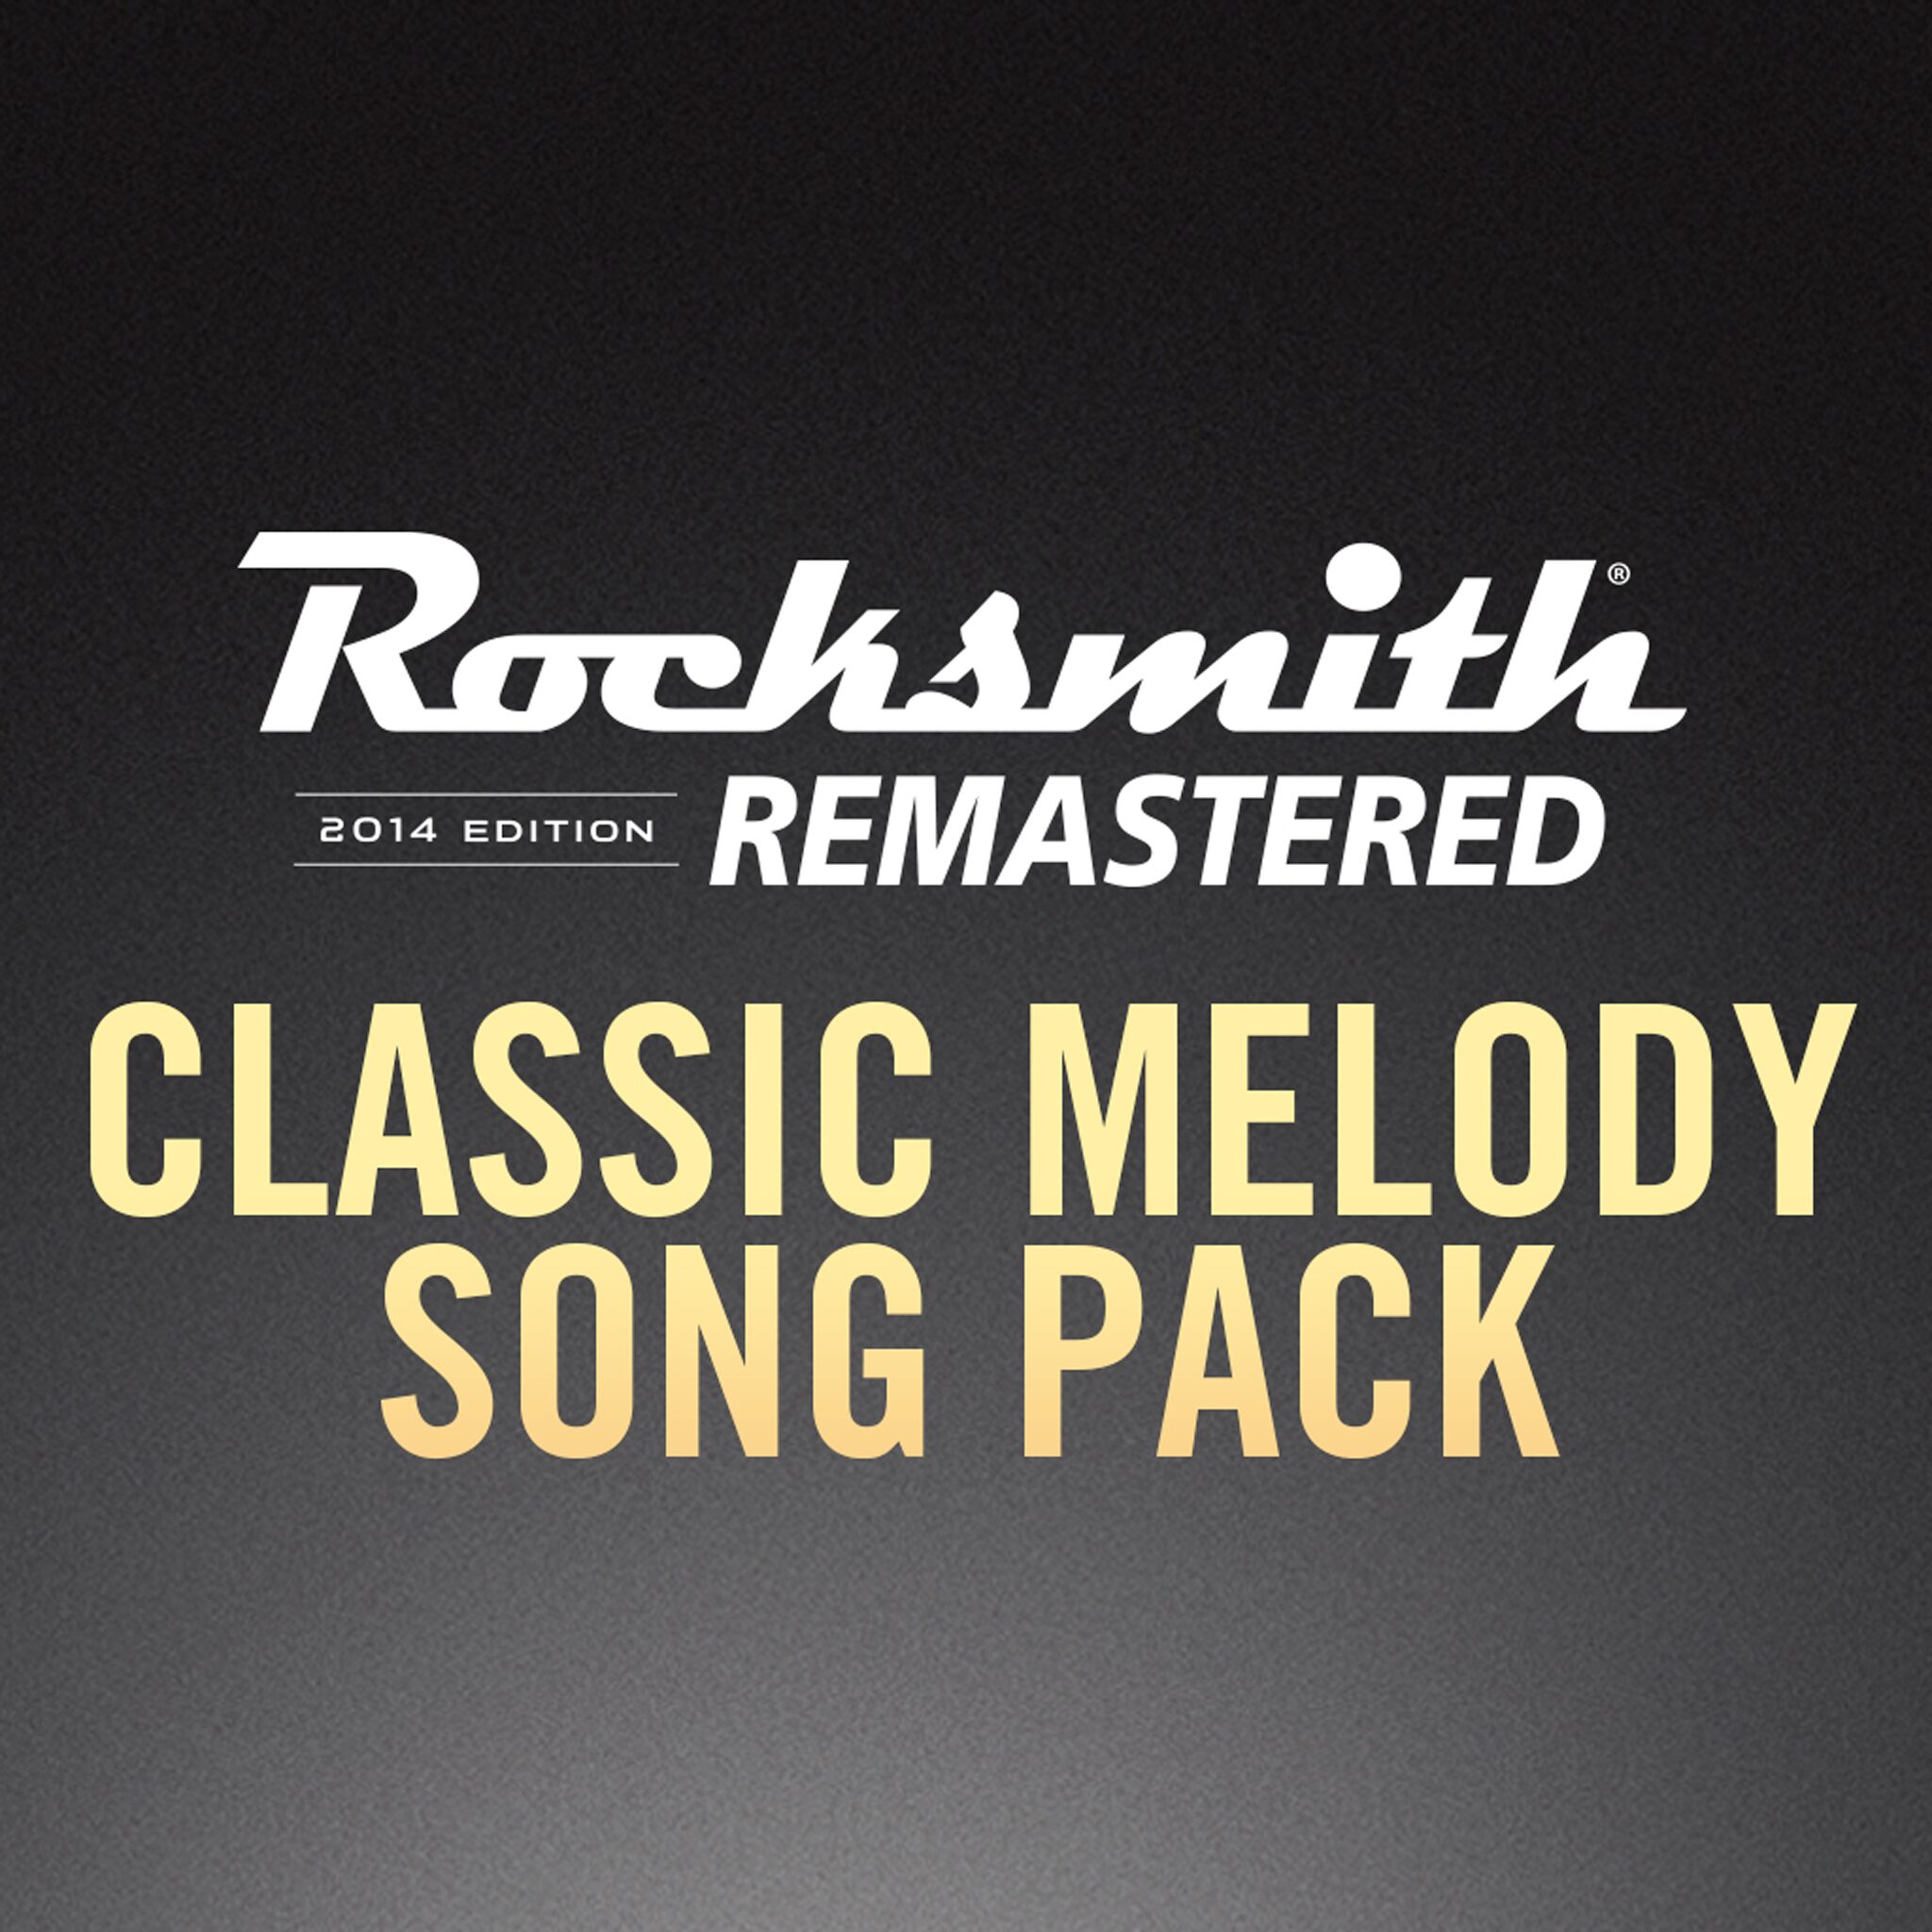 Rocksmith 2014 - Chansons de Classic Melody Song Pack